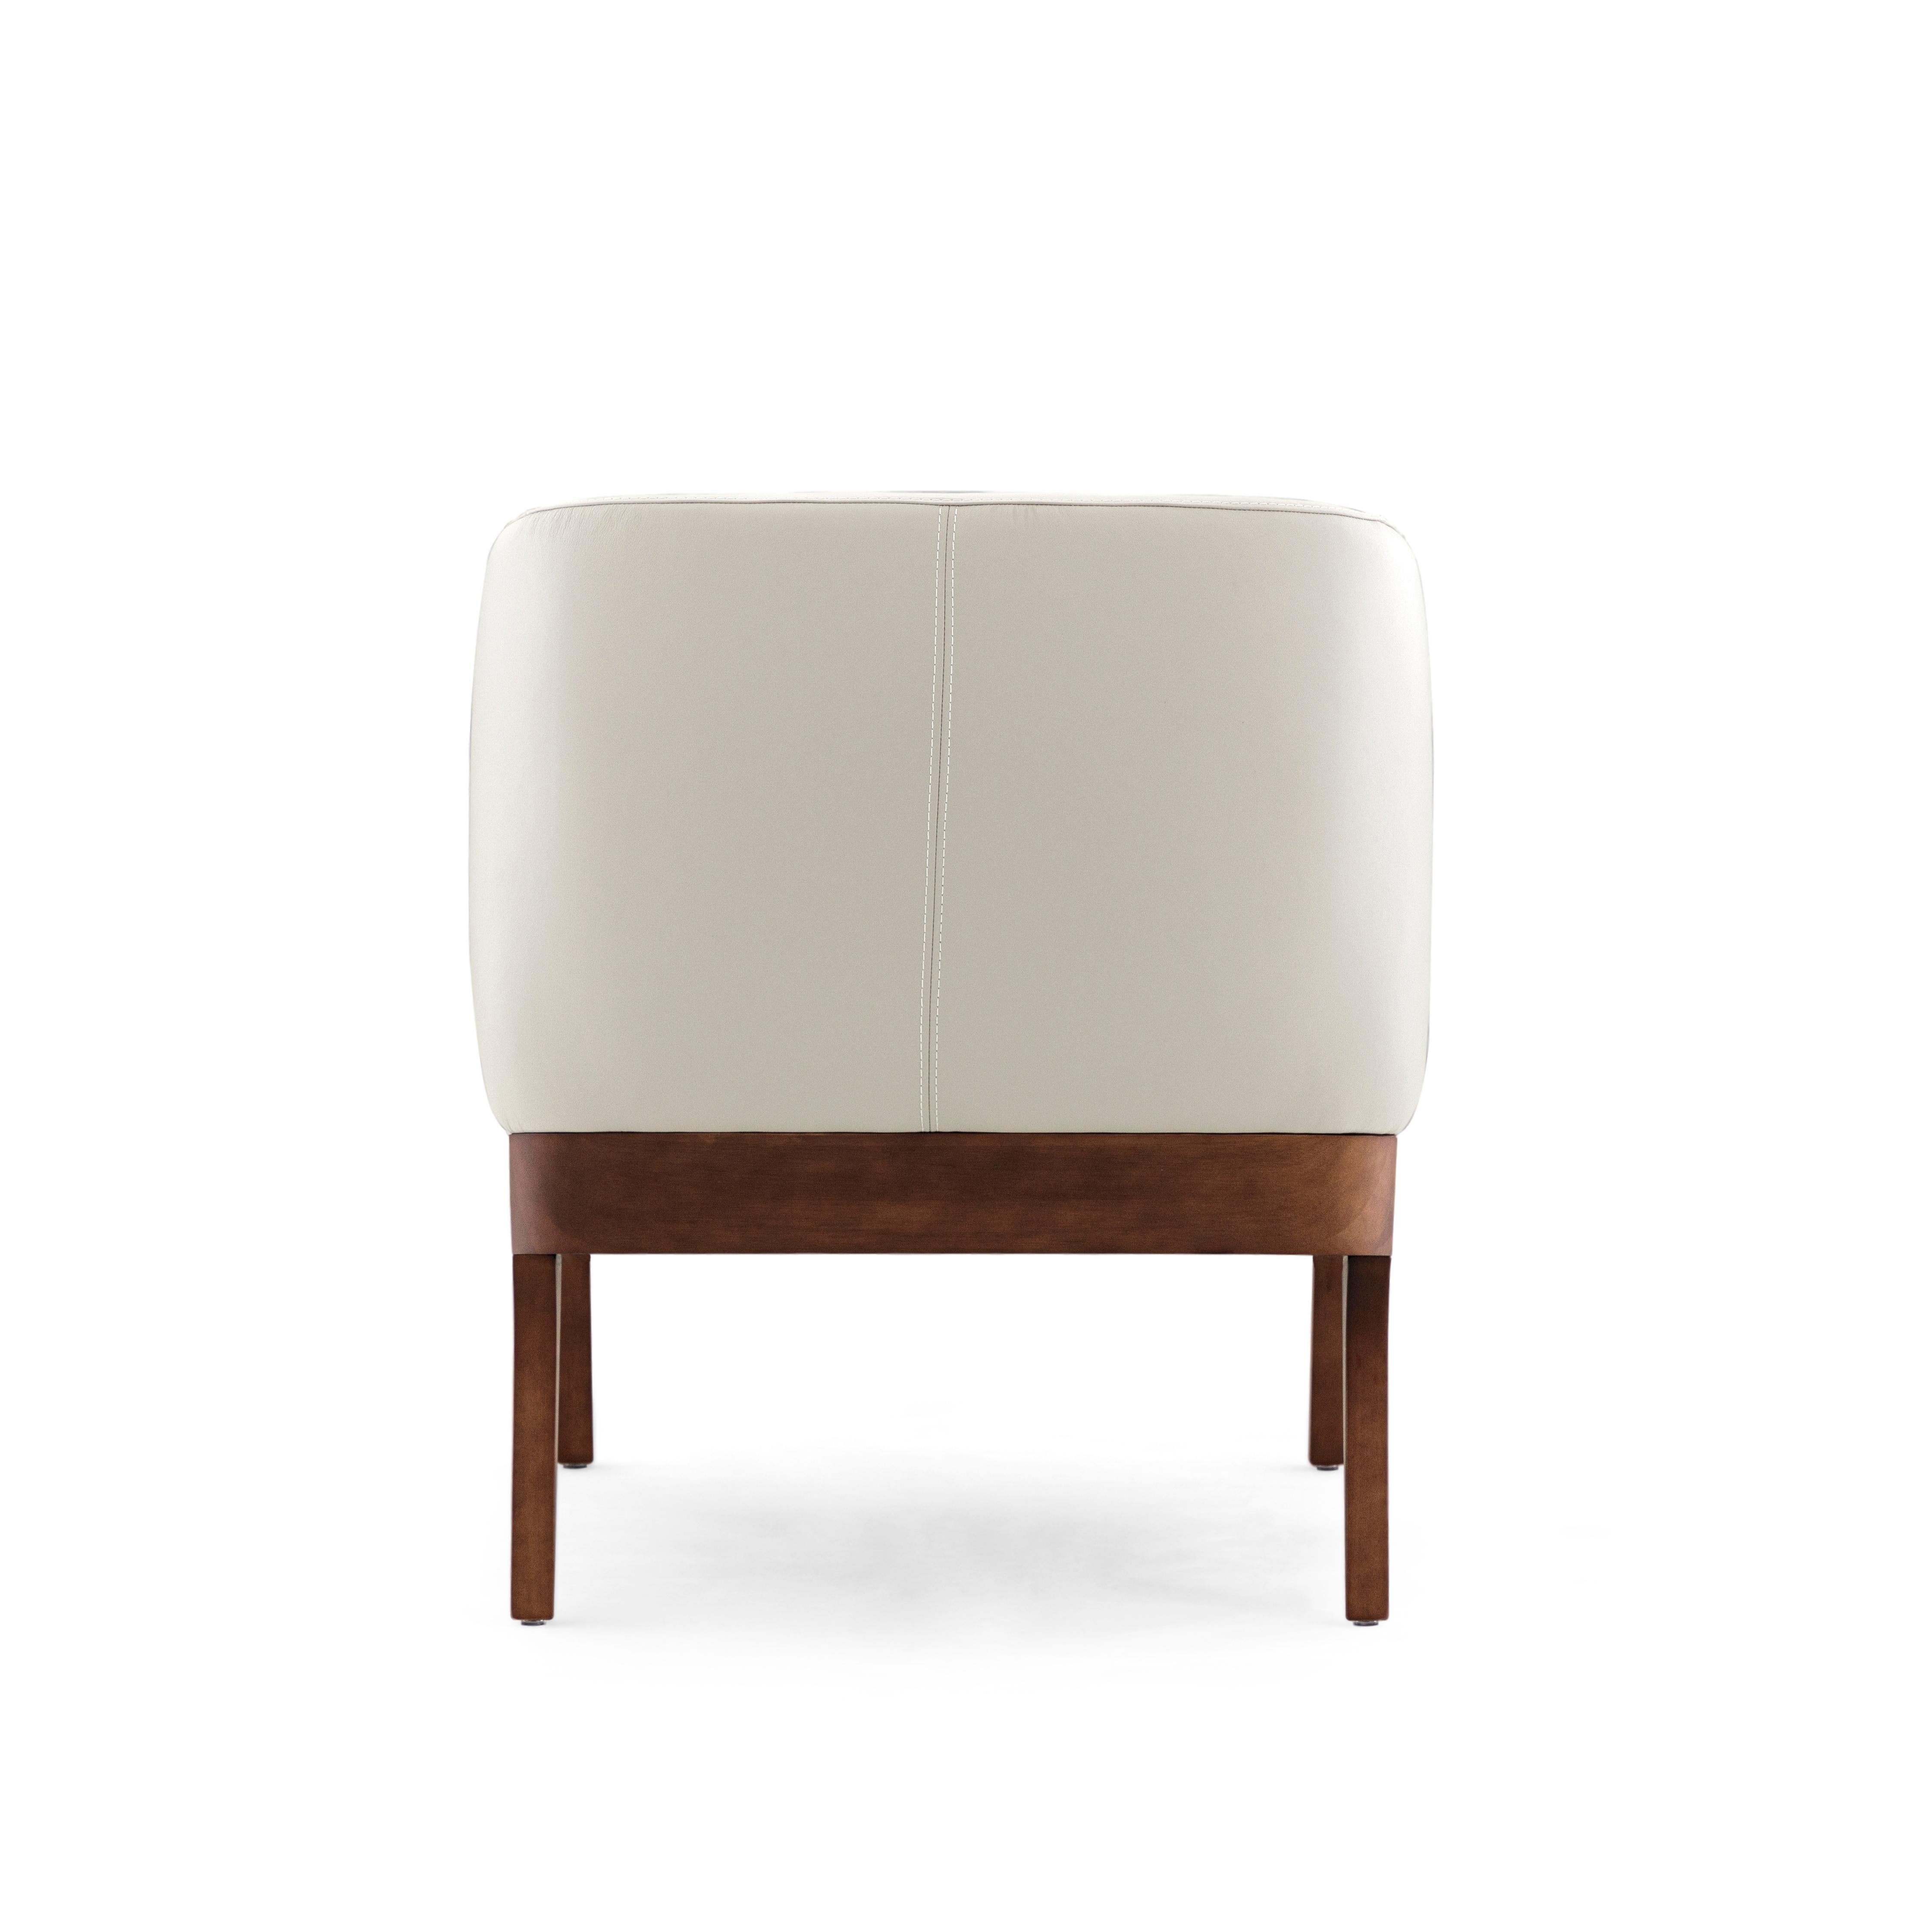 Contemporary Abra Armchair in White Leather and Walnut Wood Finish For Sale